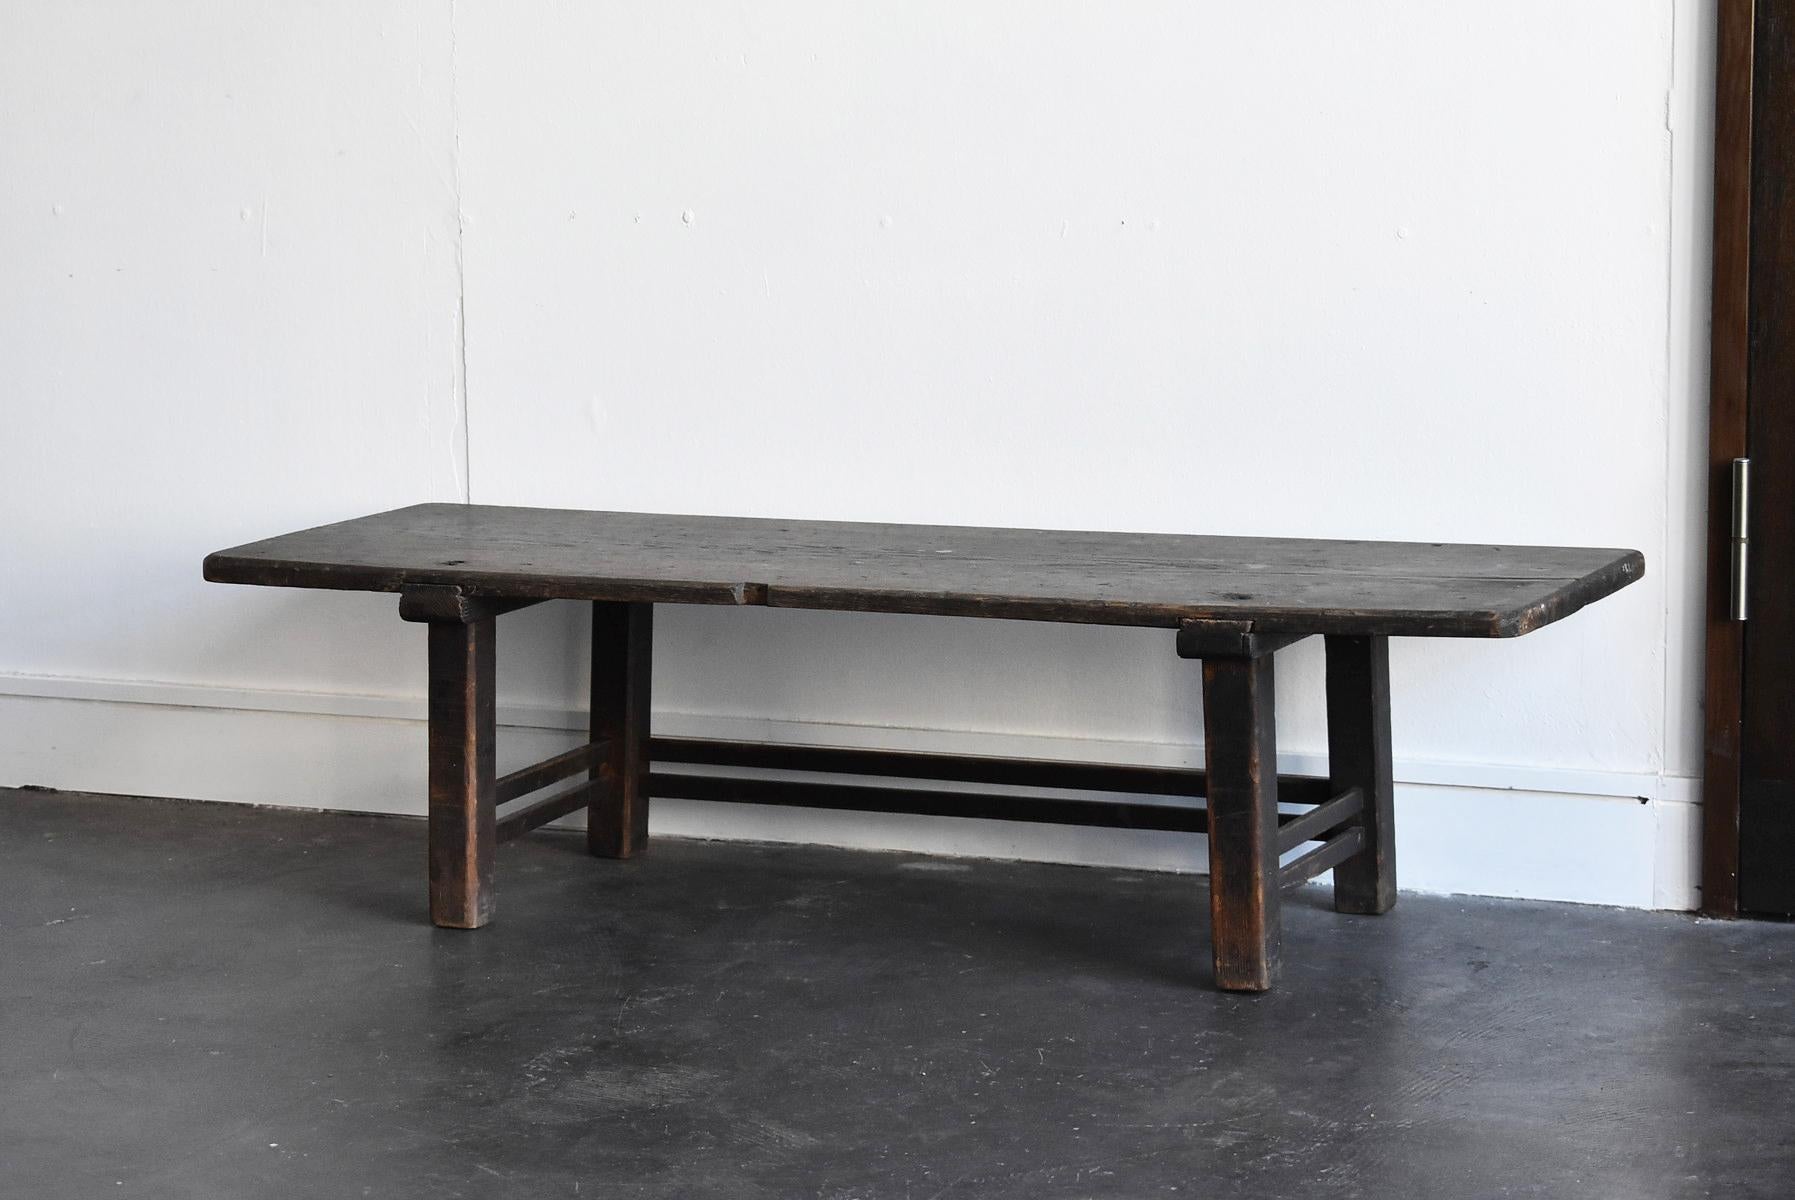 We have an aesthetic sense peculiar to Japanese people.
And we introduce the unique items that only we can do, the route of purchasing in Japan, the experience value so far, and the way that no one can imitate.

This desk was made in Japan from